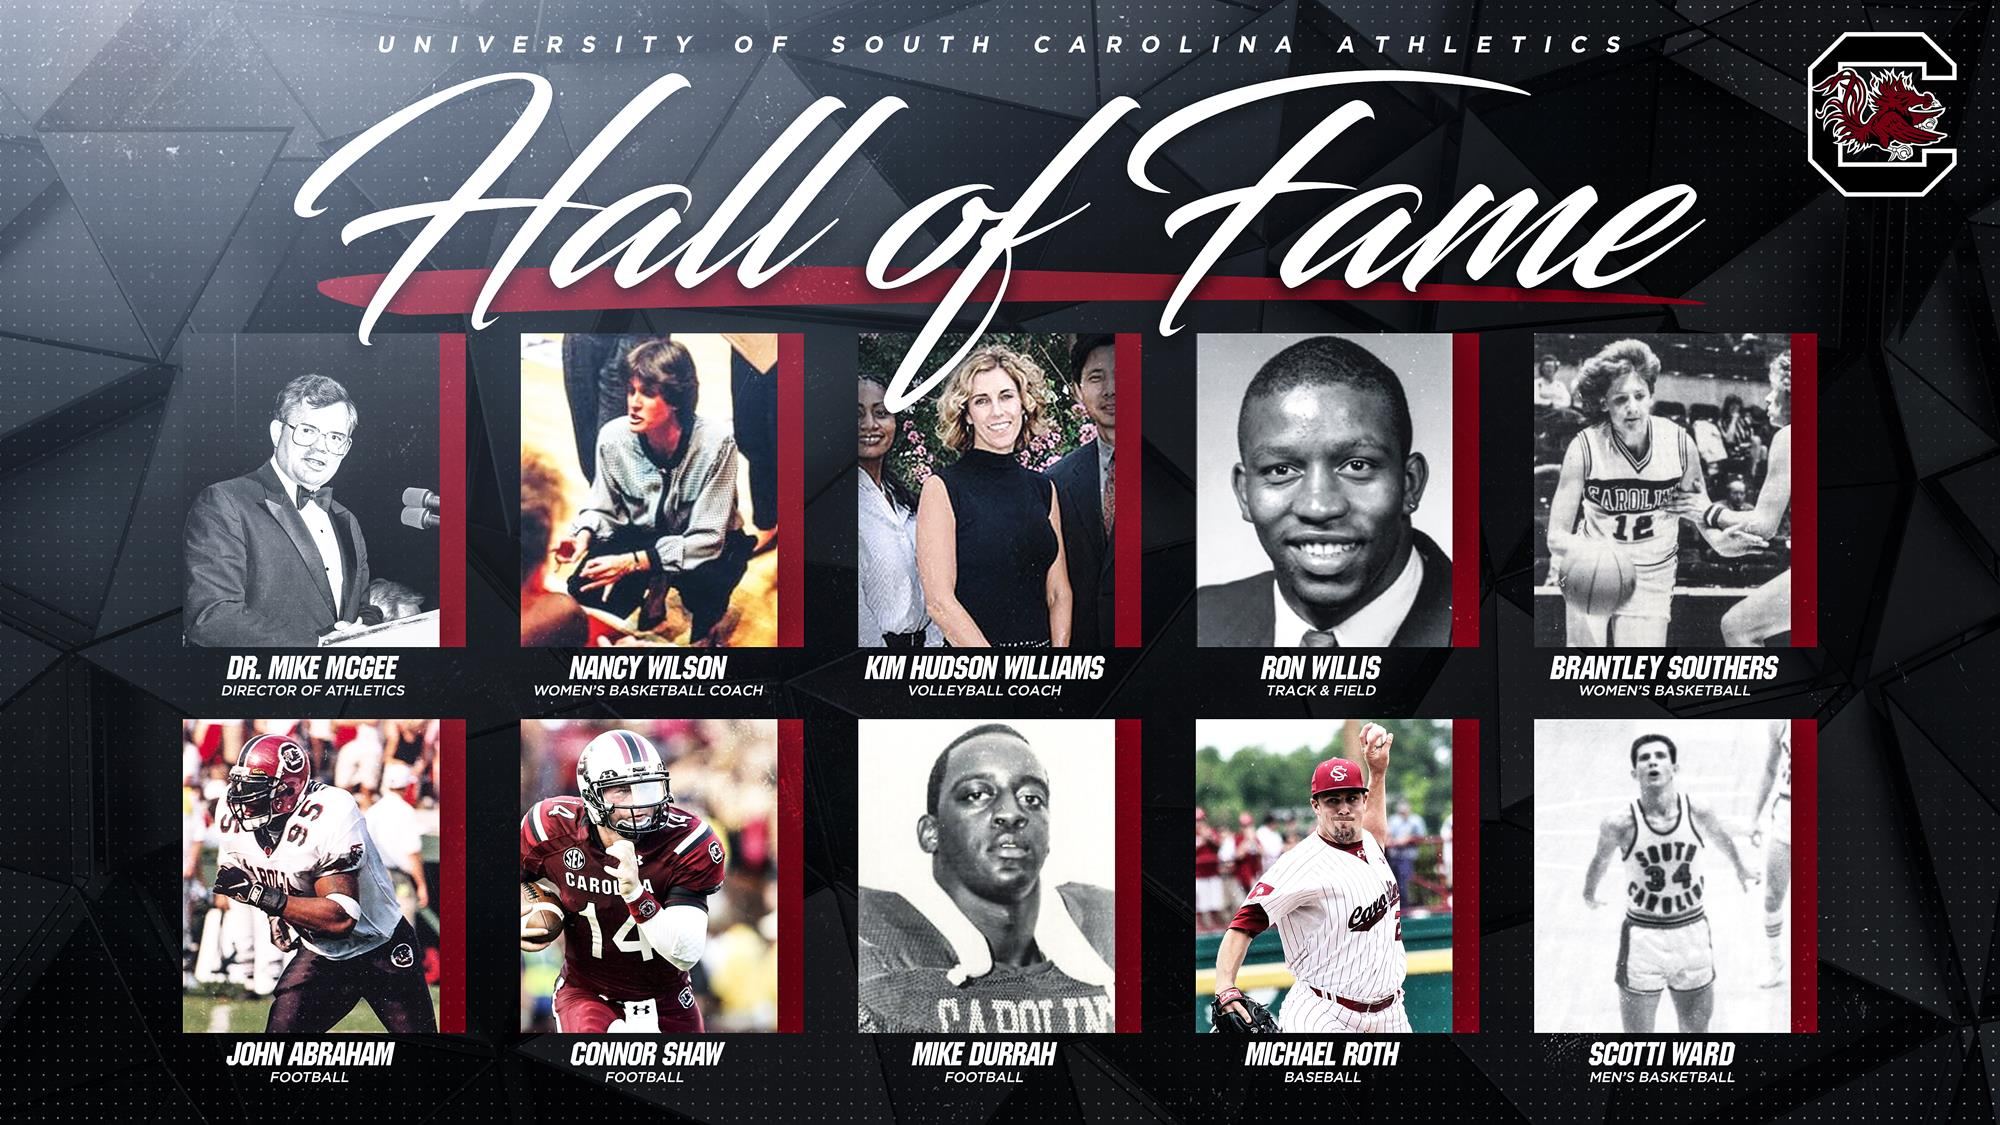 Ten Elected to University of South Carolina Athletics Hall of Fame